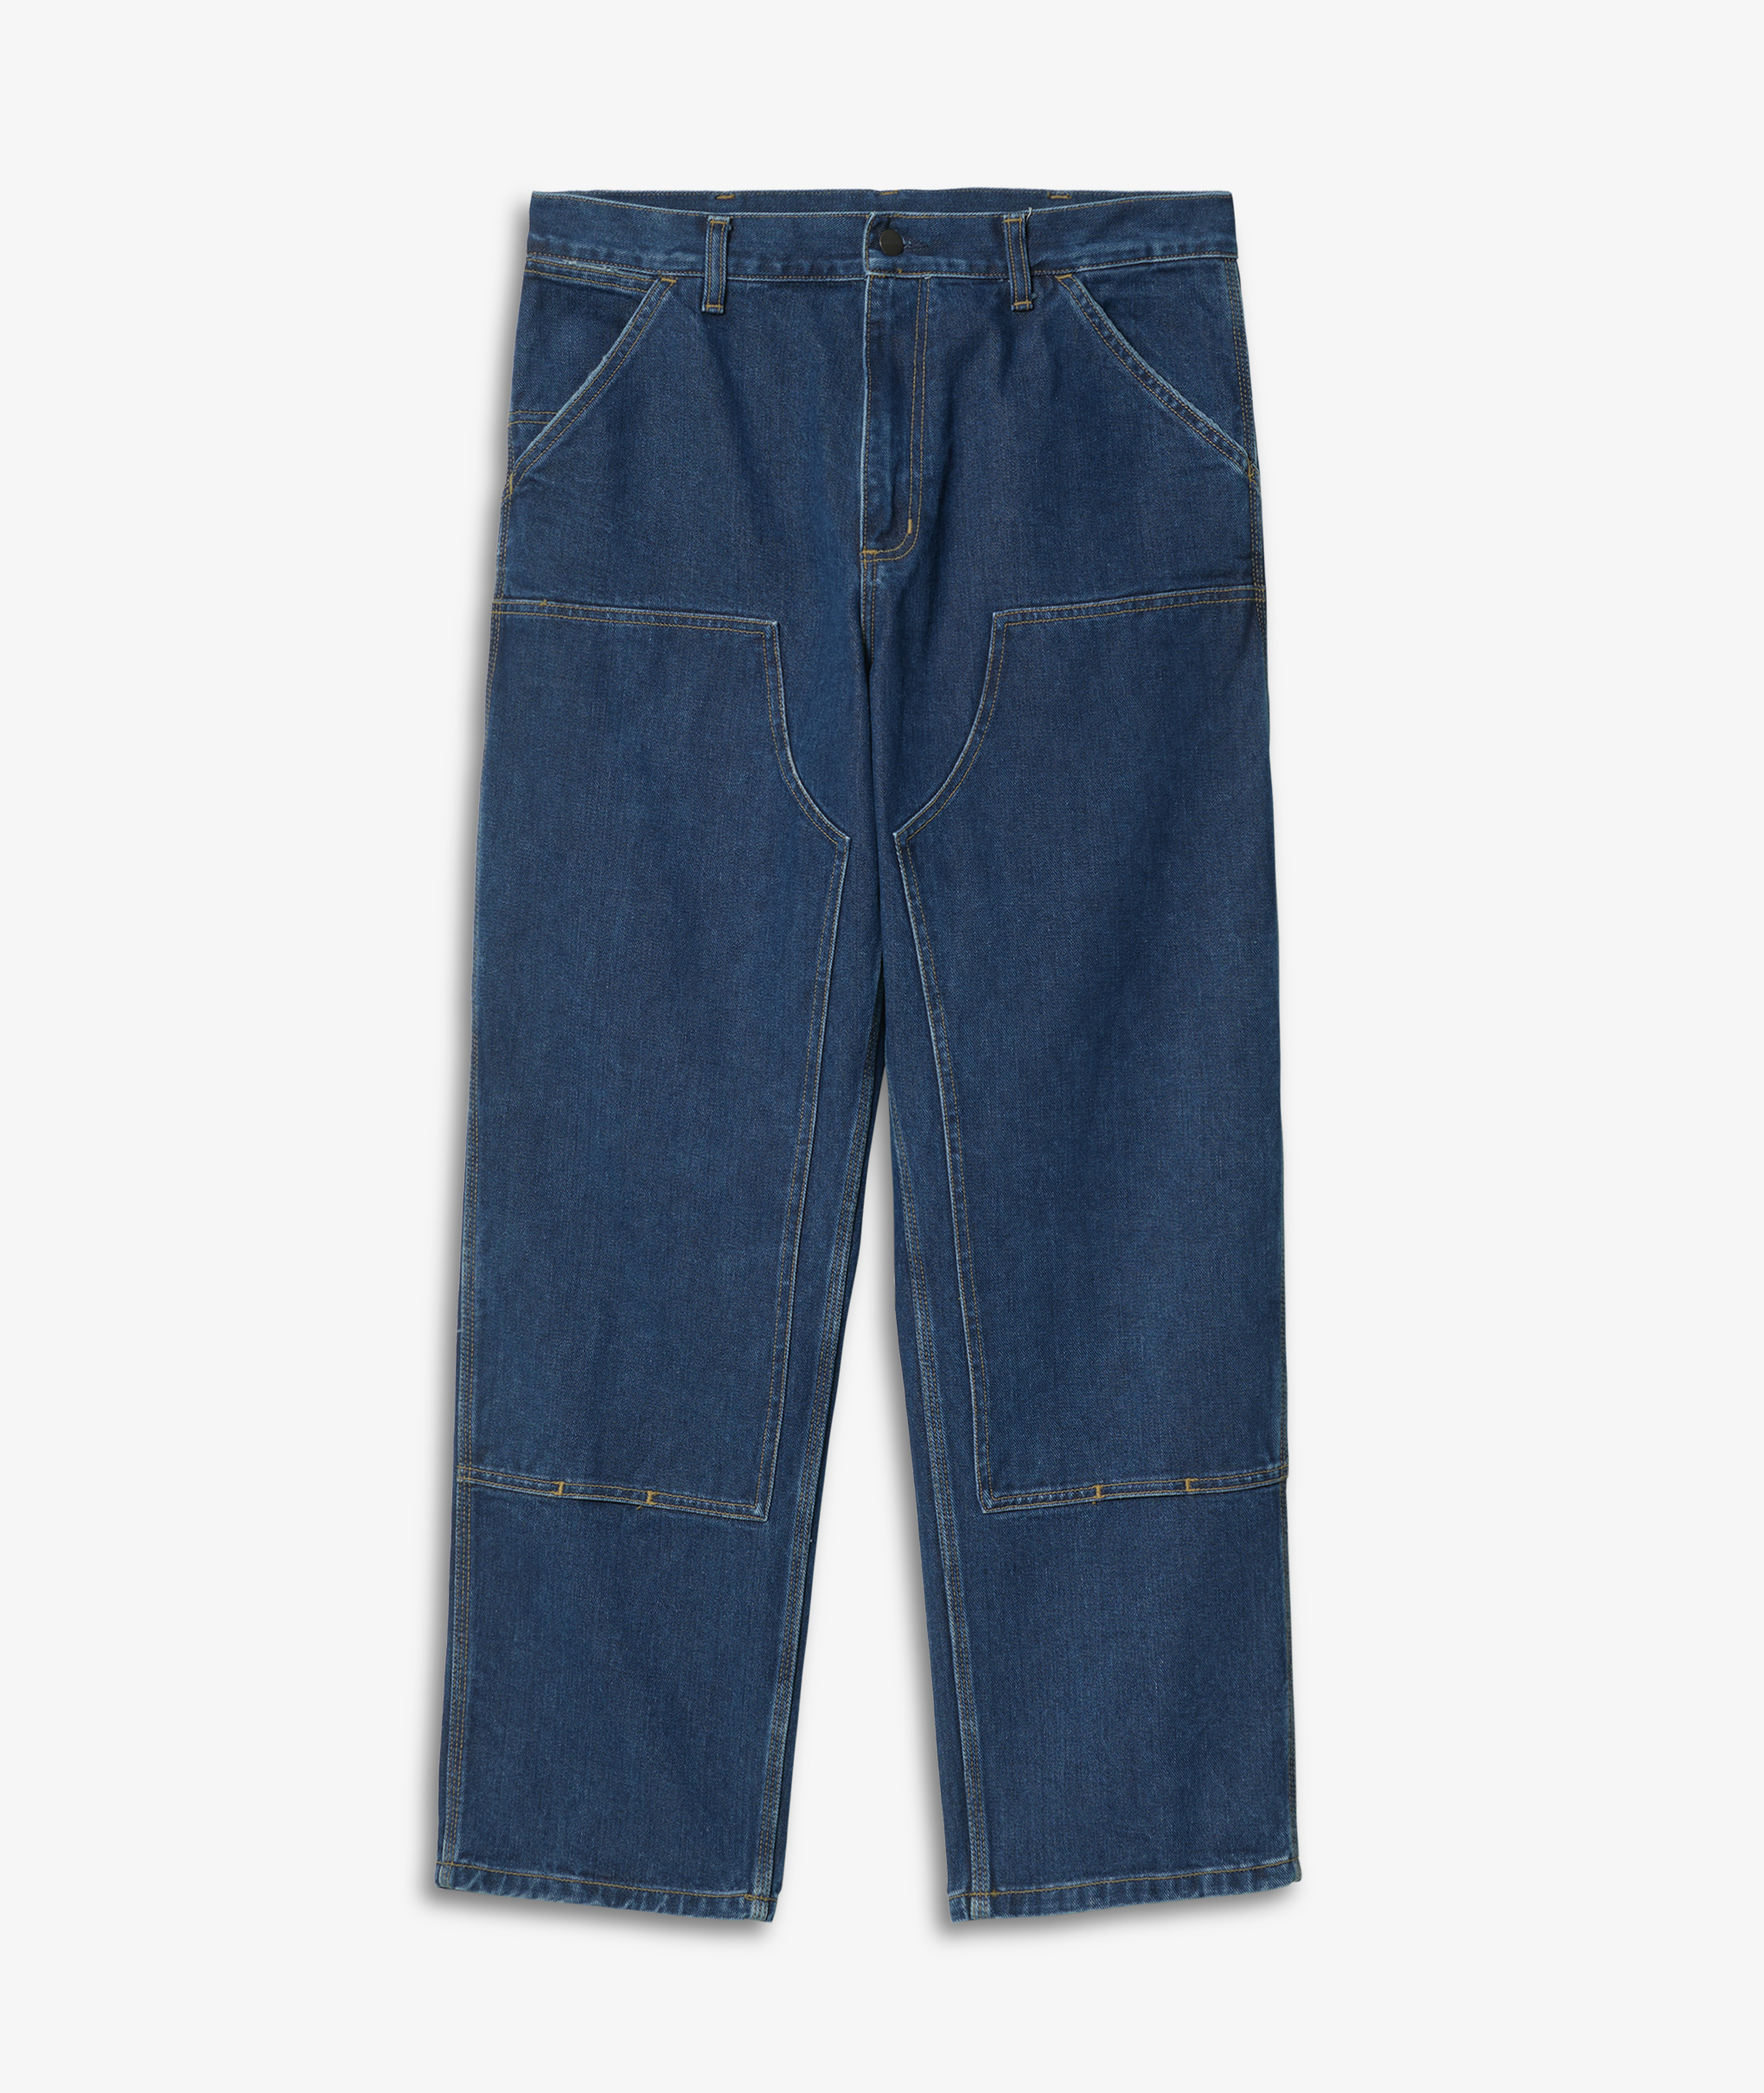 Norse Store  Shipping Worldwide - Carhartt WIP Double Knee Pant - BLUE  STONE WASHED